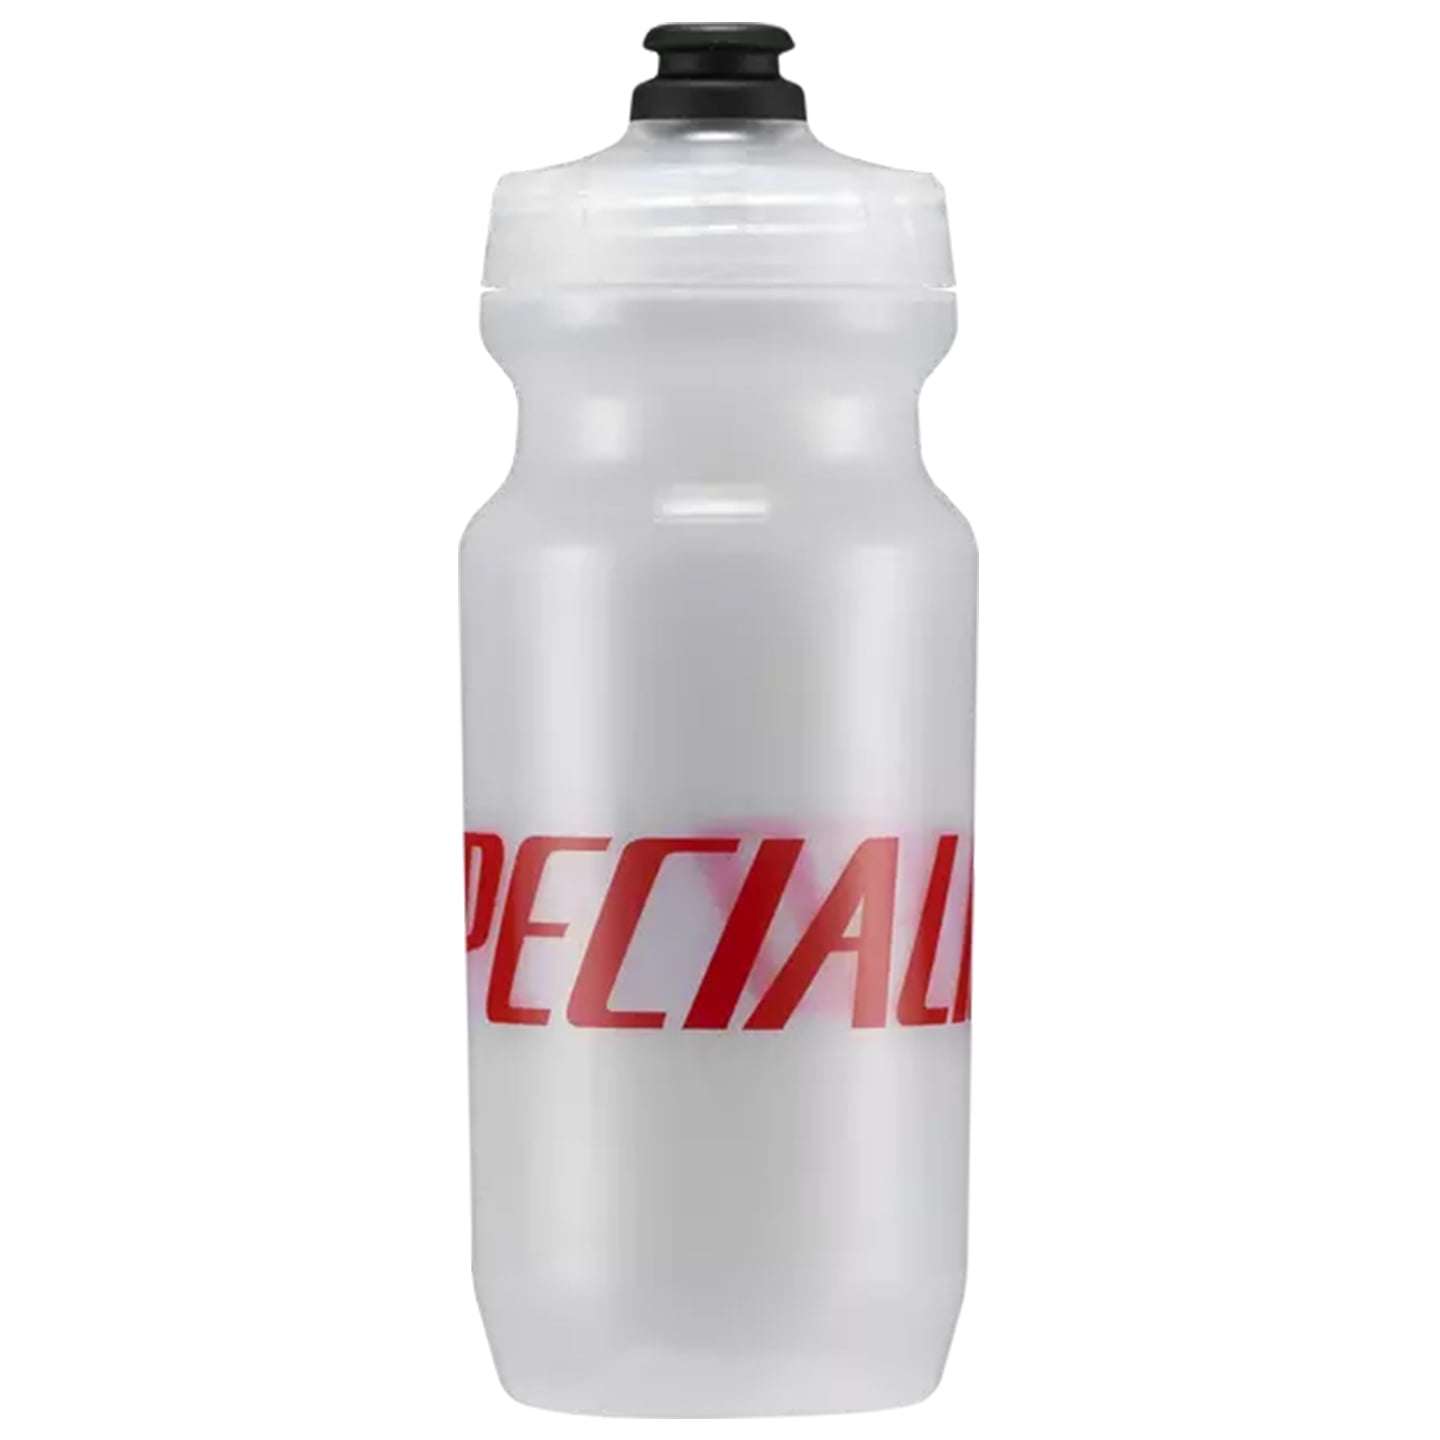 SPECIALIZED Little Big Mouth 620 ml Water Bottle Water Bottle, Bike bottle, Bike accessories